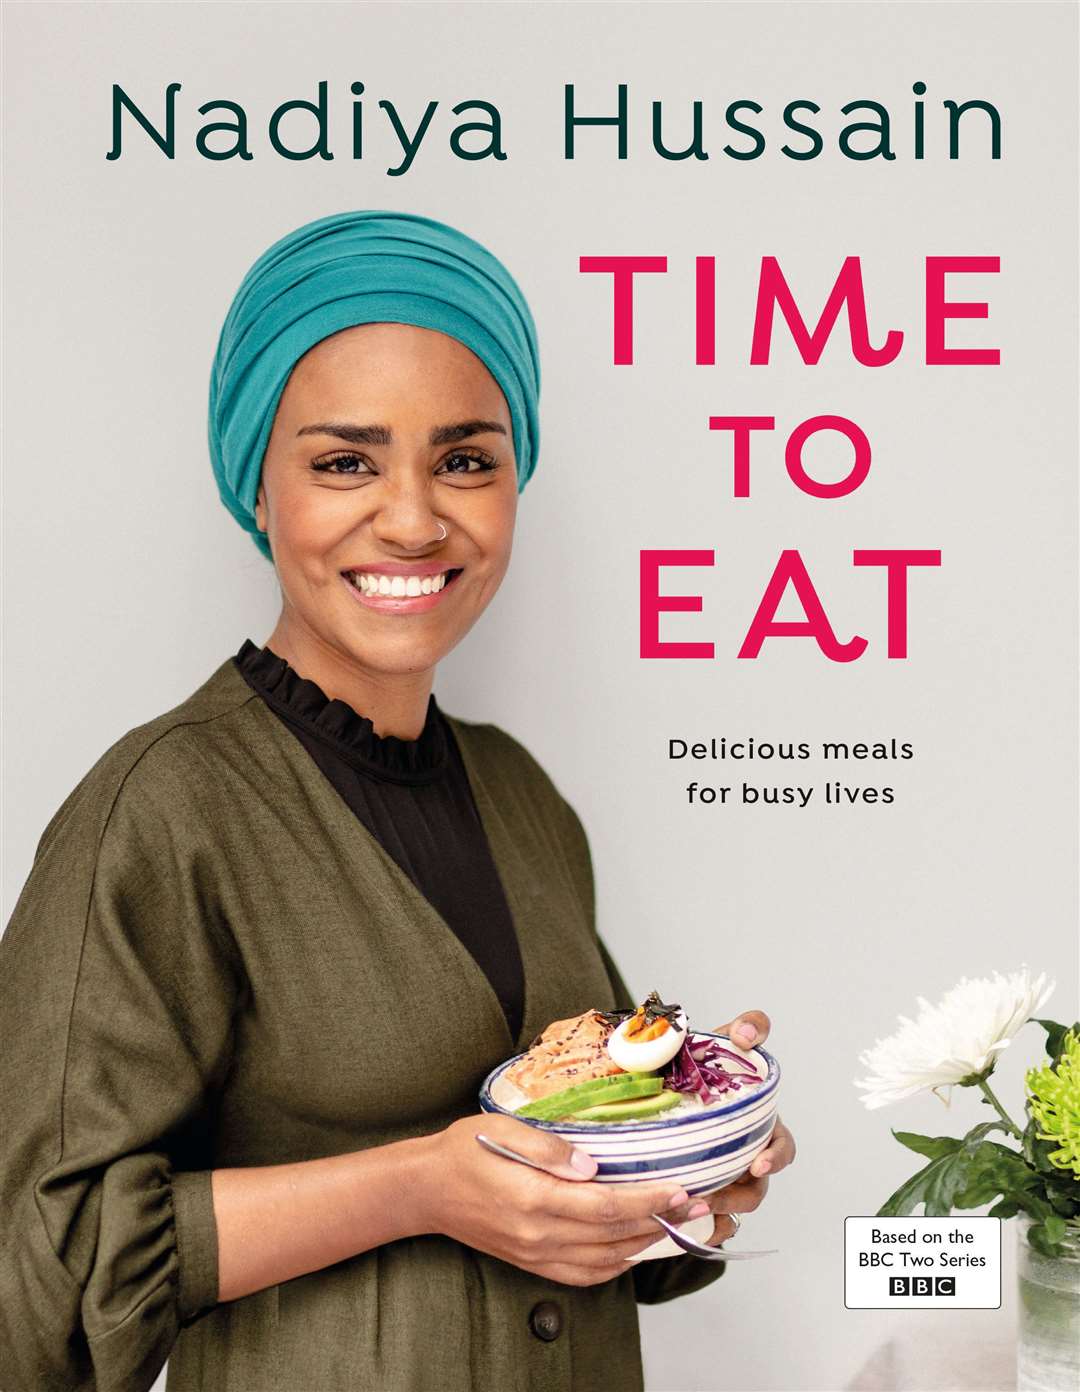 Time To Eat by Nadiya Hussain, is published by Michael Joseph, priced £20. Available now. The accompanying Nadiya’s Time To Eat series is currently airing on BBC Two and available on iPlayer.